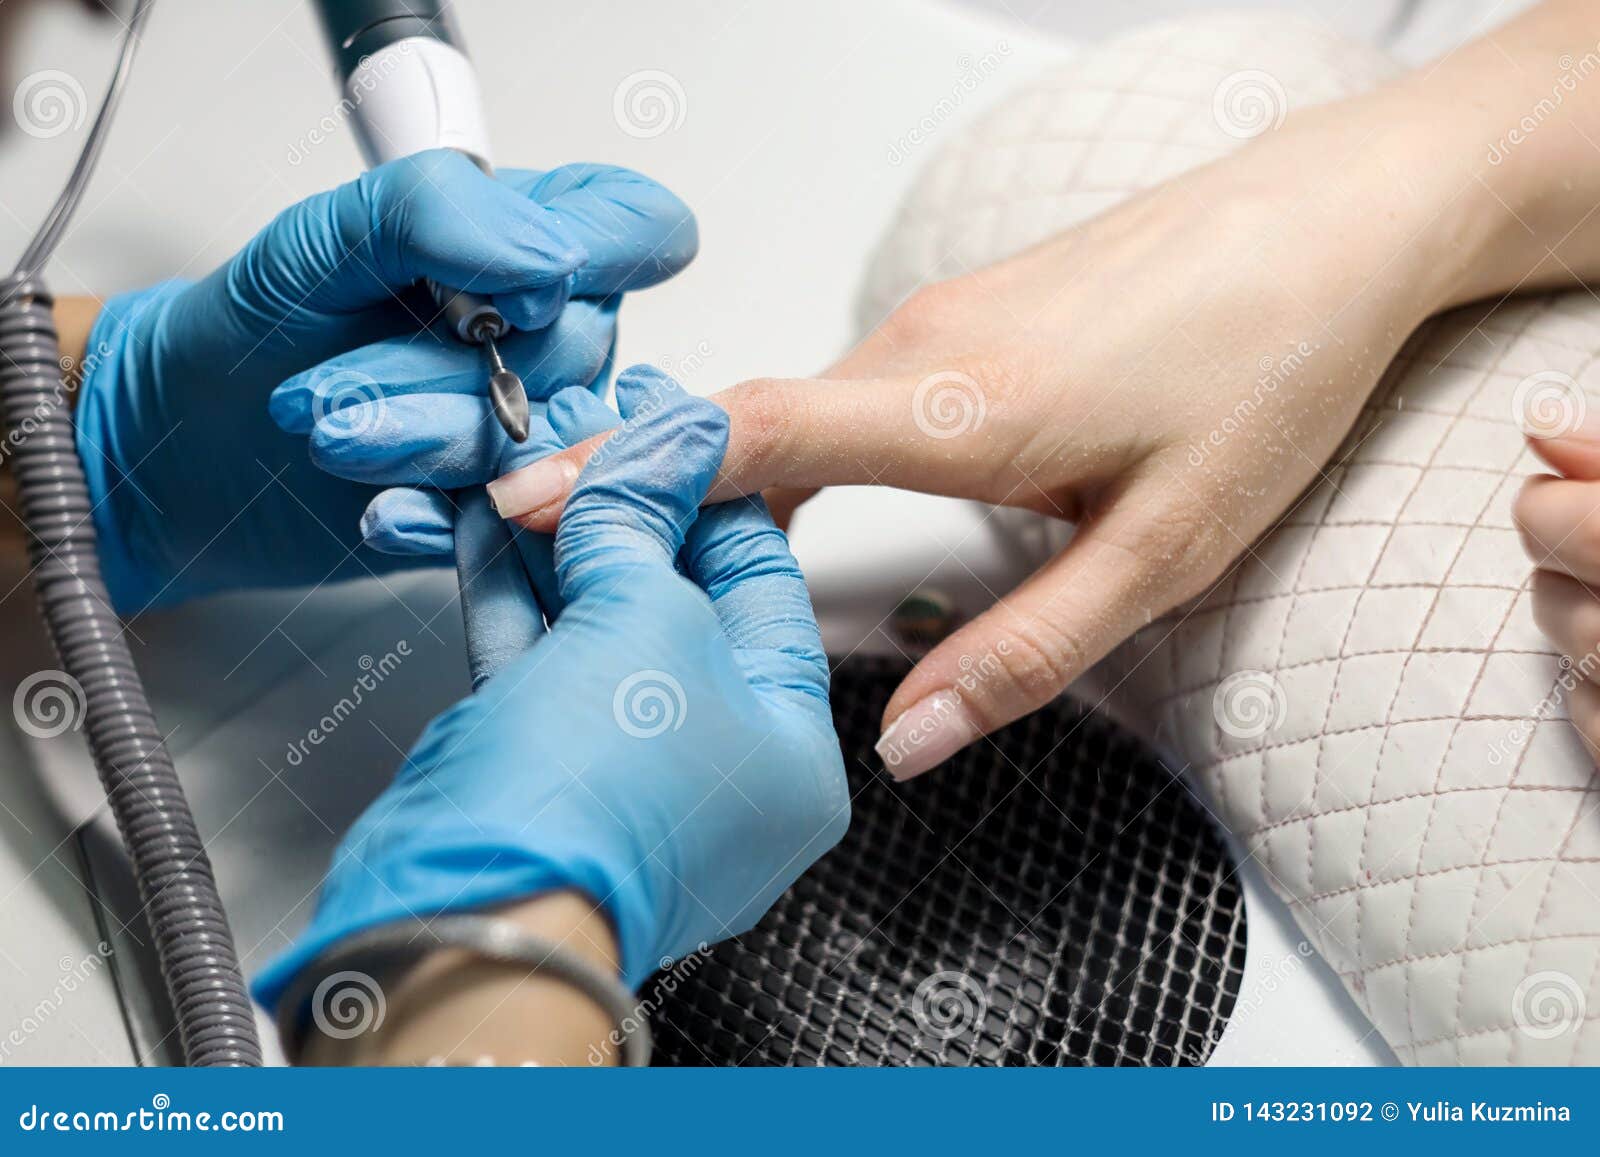 Nail Salon, Nail and Hand Care Stock Photo - Image of gloves, finger ...